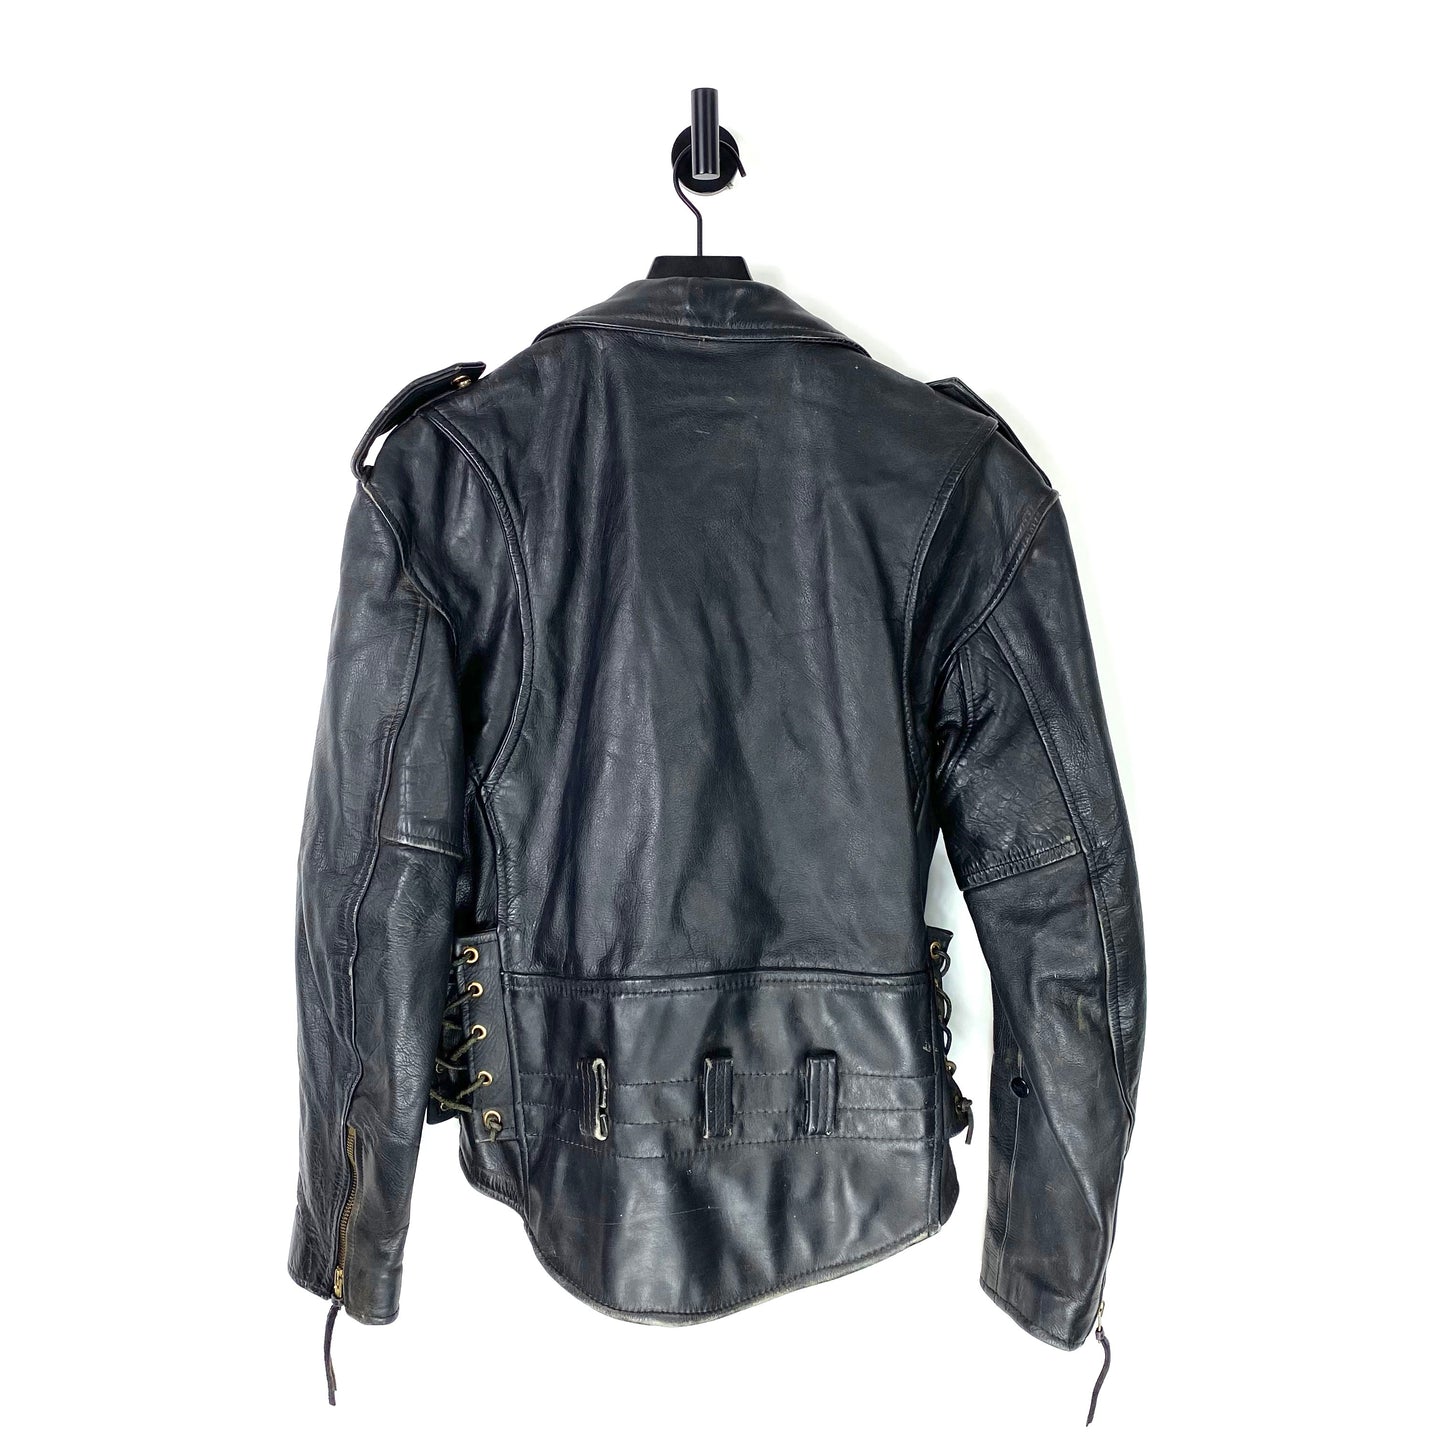 80s Leather Motorcycle Jacket  - Small (40)